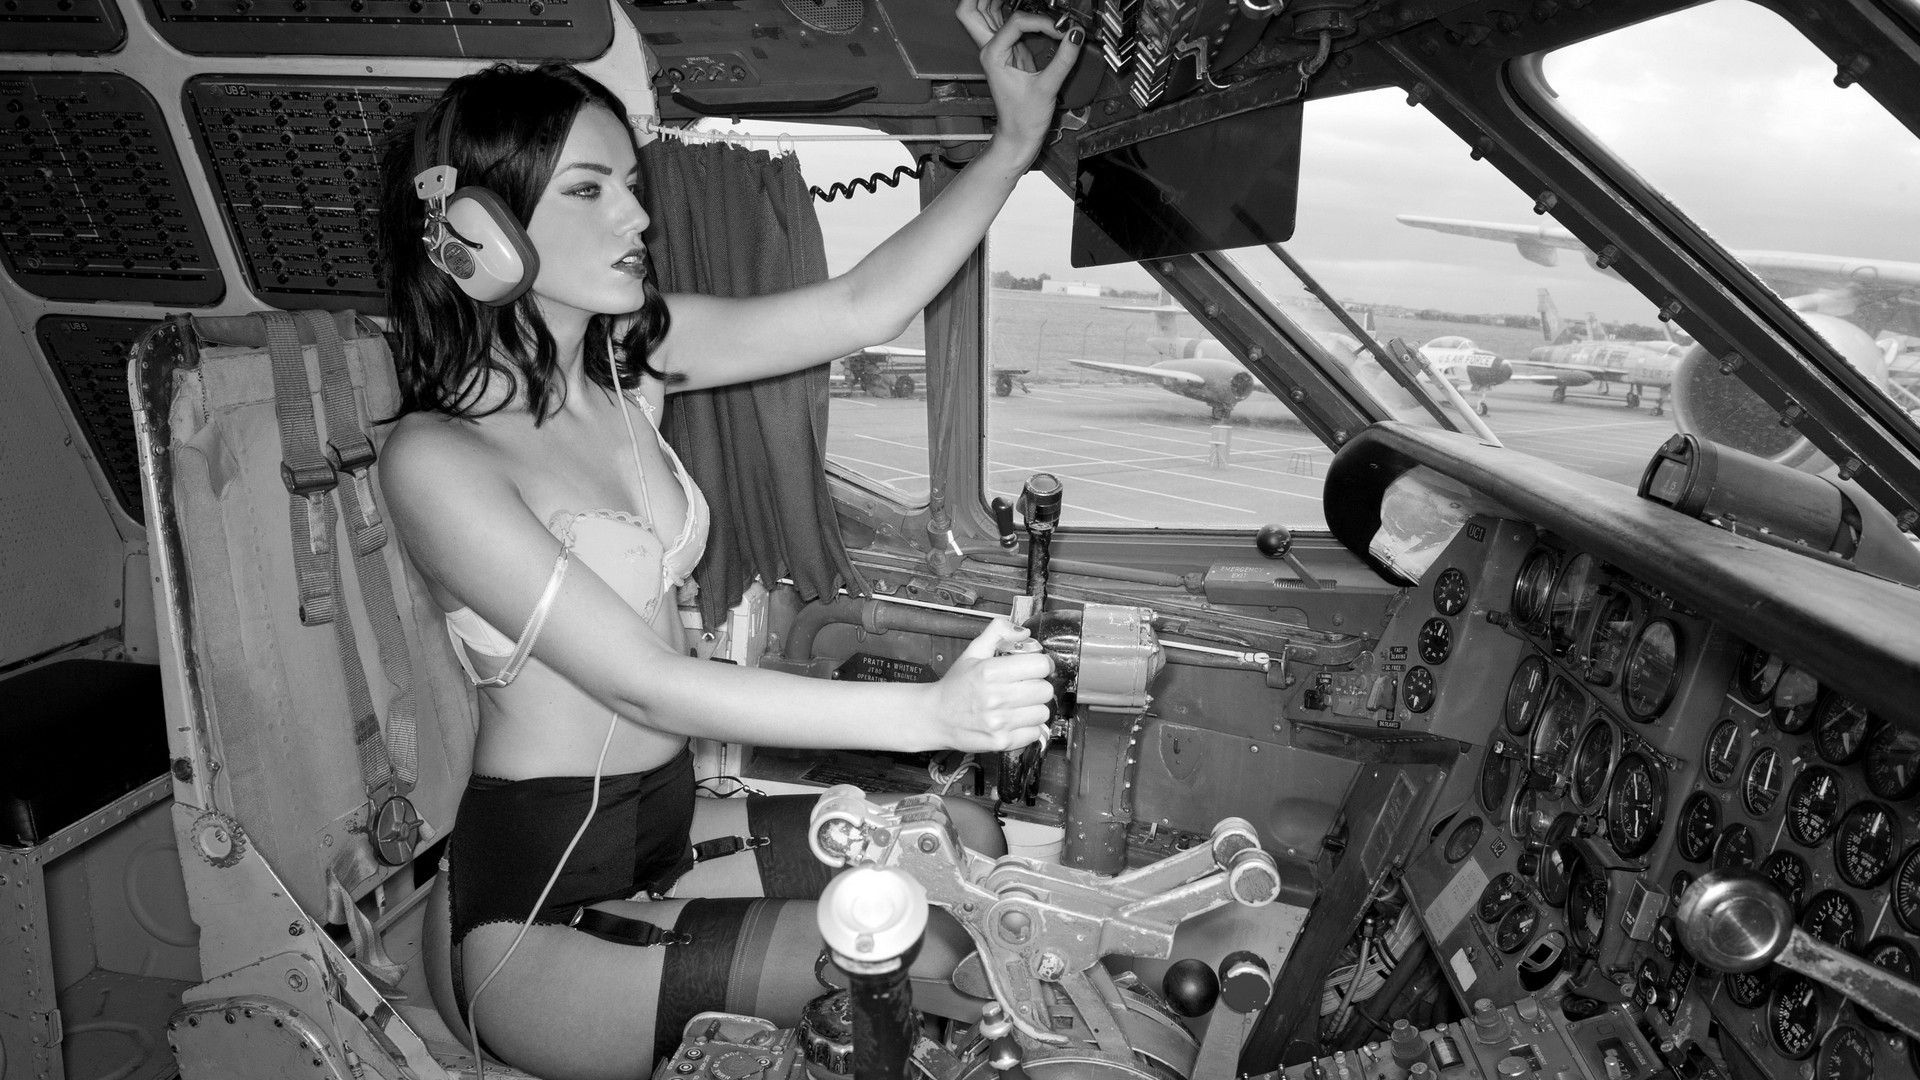 1920x1080 women monochrome model legs vehicle photography airplane aircraft lingerie Pers...